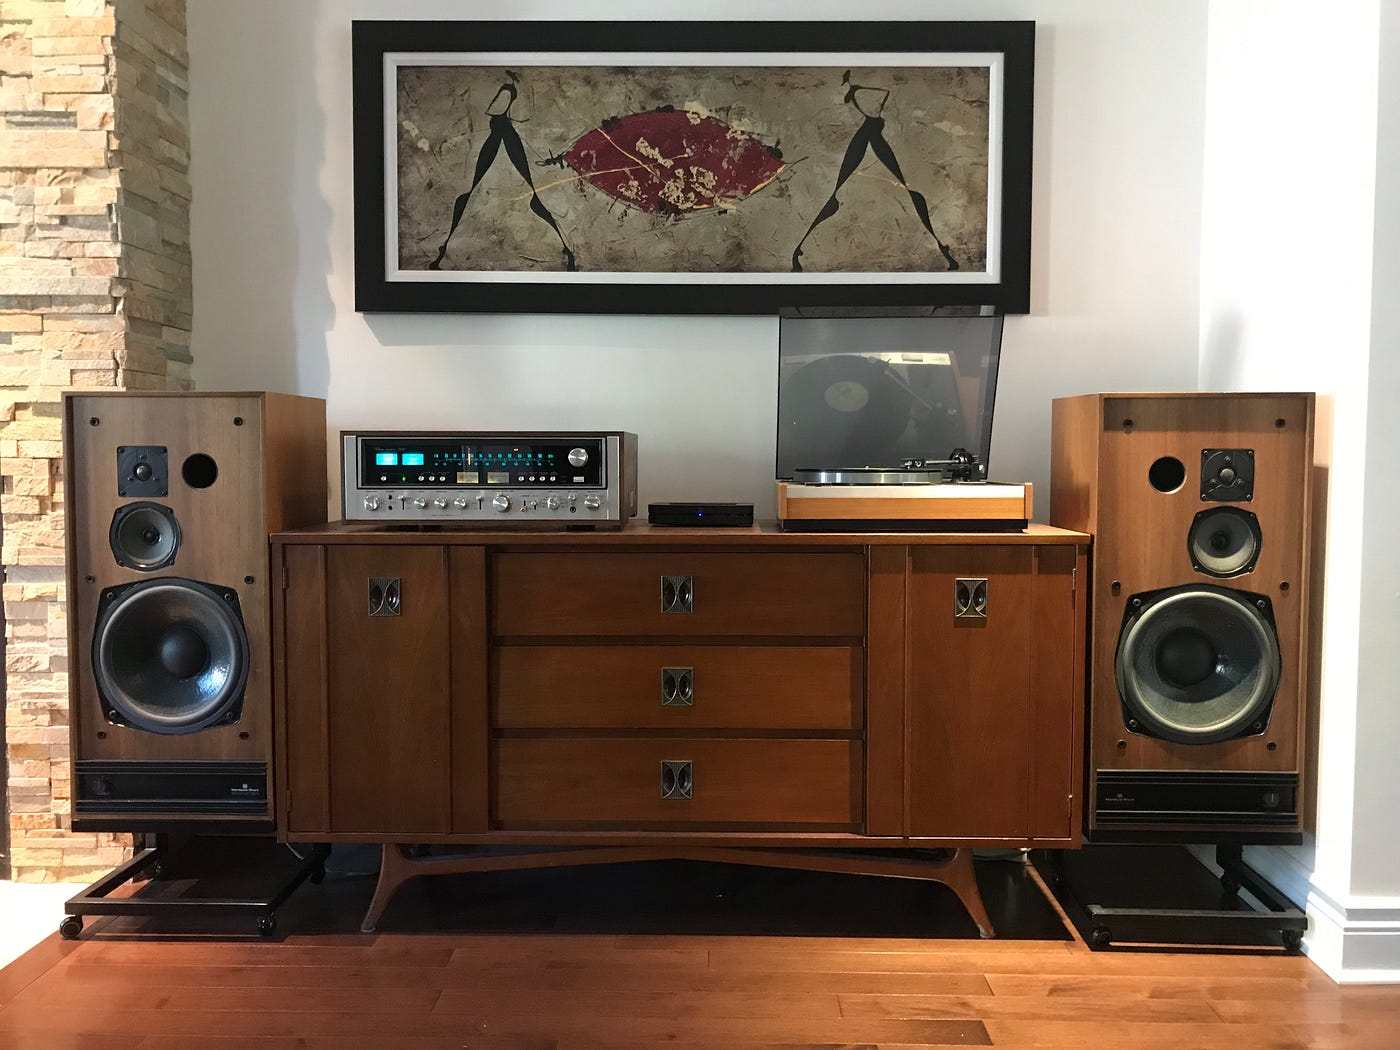 The Sansui 9090 Receiver or: How an avid vintage Marantz collector learned  to love the bomb. | by HiFi Setup | Medium